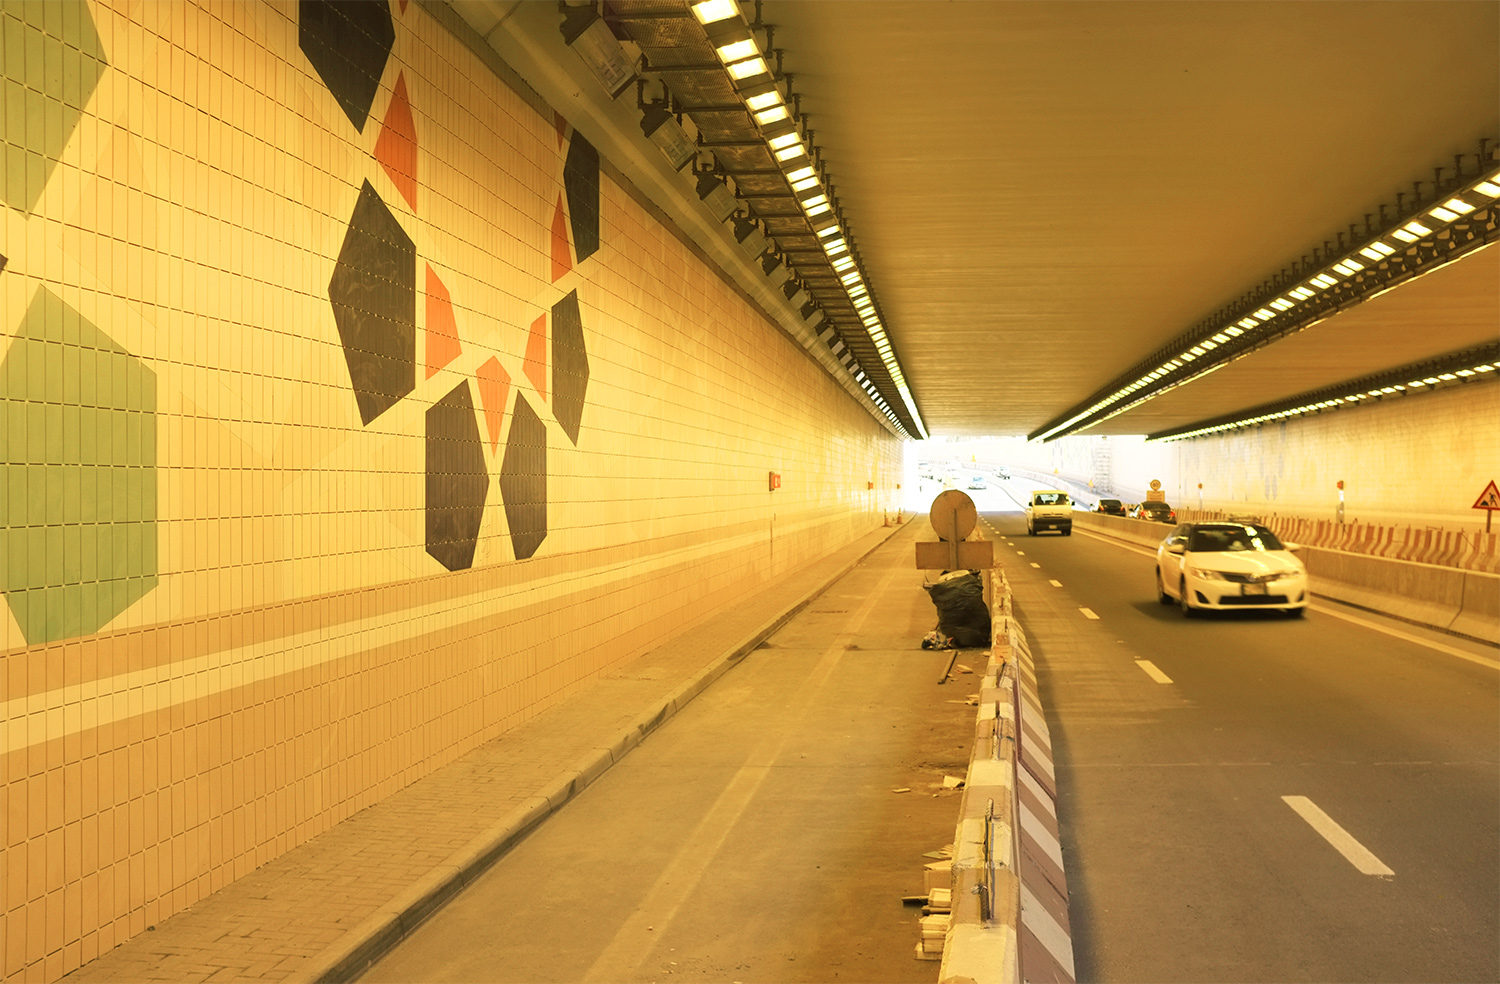  Underpass connecting Dubai Financial district and Business Bay area  D 86, Al Mustaqbal St    